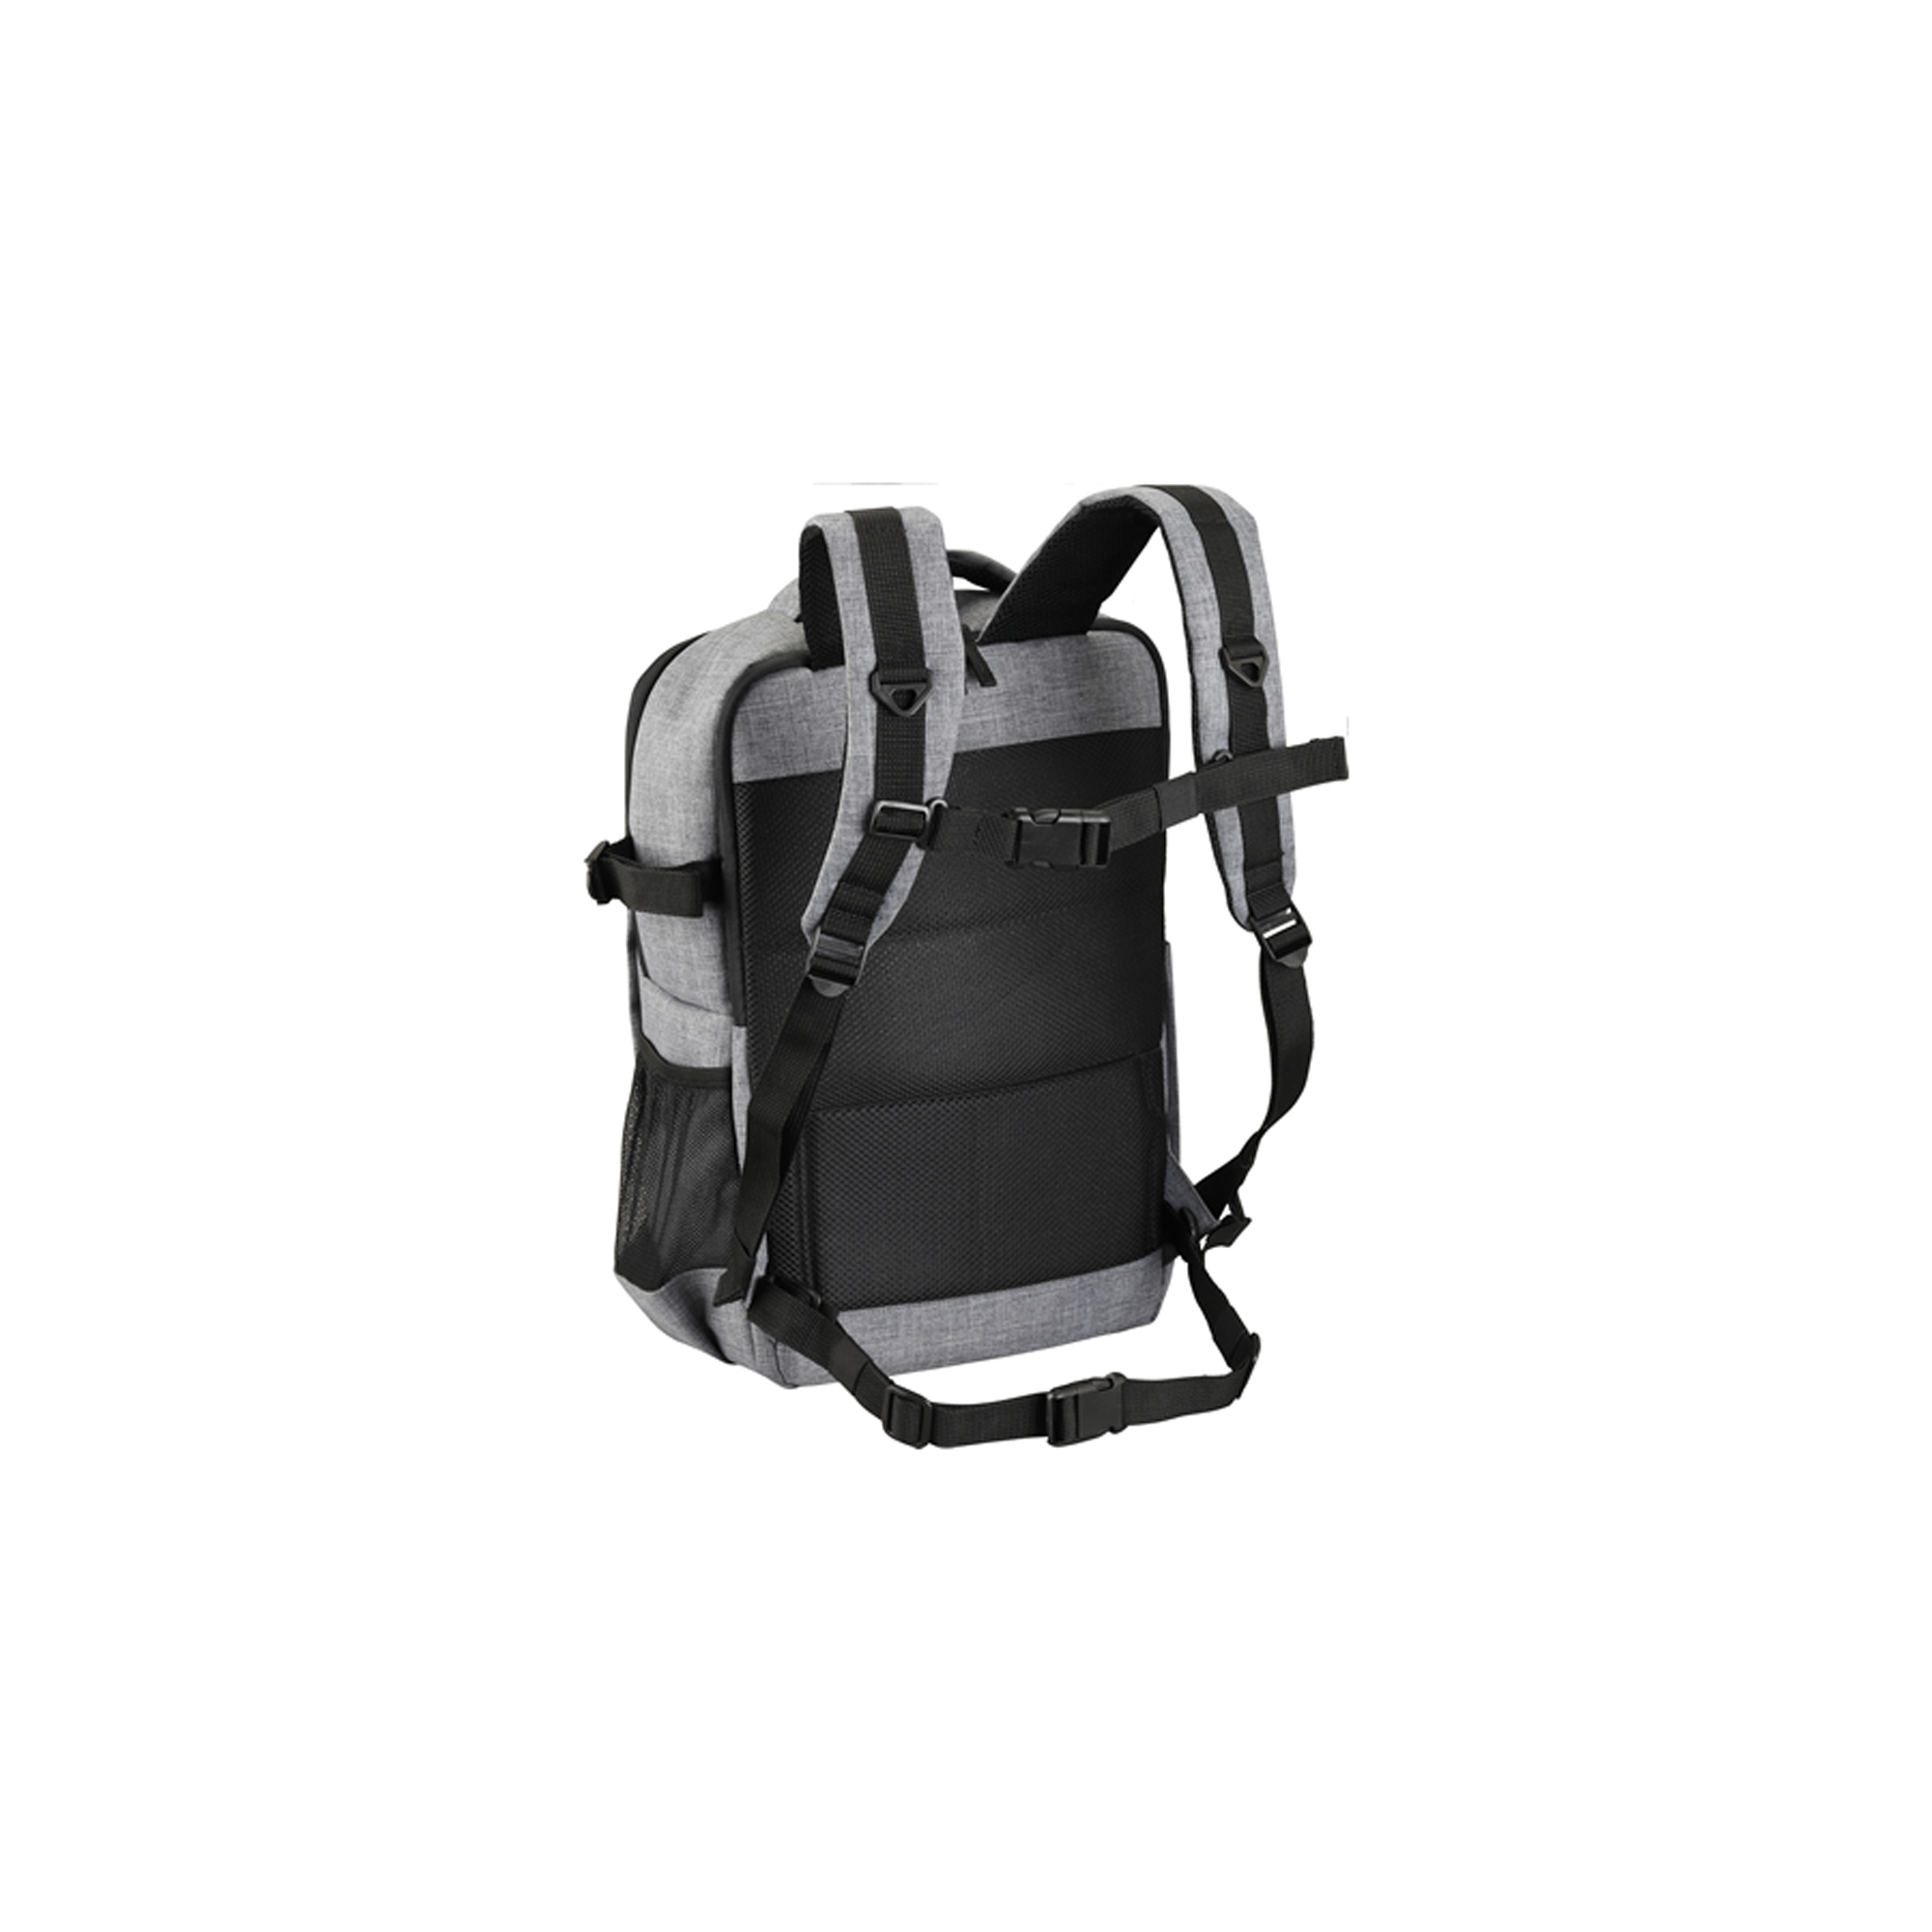 Libec Camera bag with 17 liter capacity and 2 mergeable storage spaces